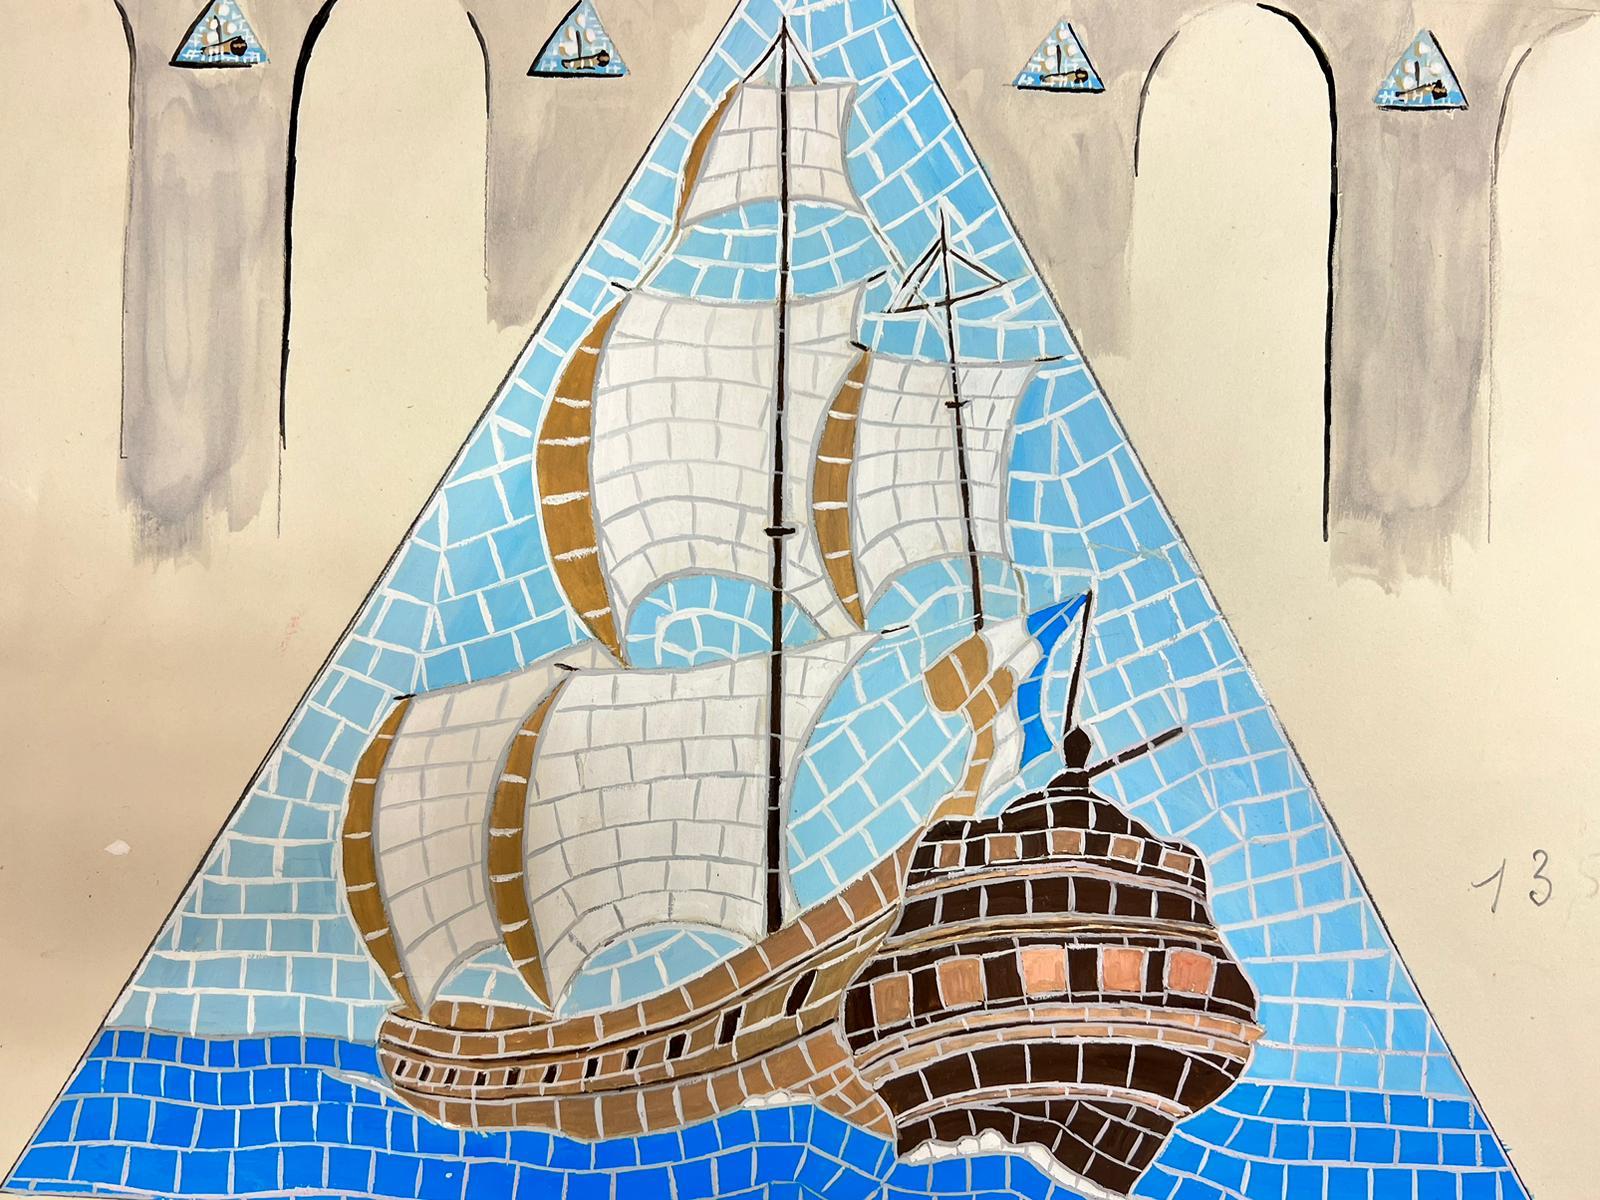 Mid Century French Illustration Sketch Of A Mosaic Ship In The Sea Drawing - Post-Impressionist Painting by Josine Vignon